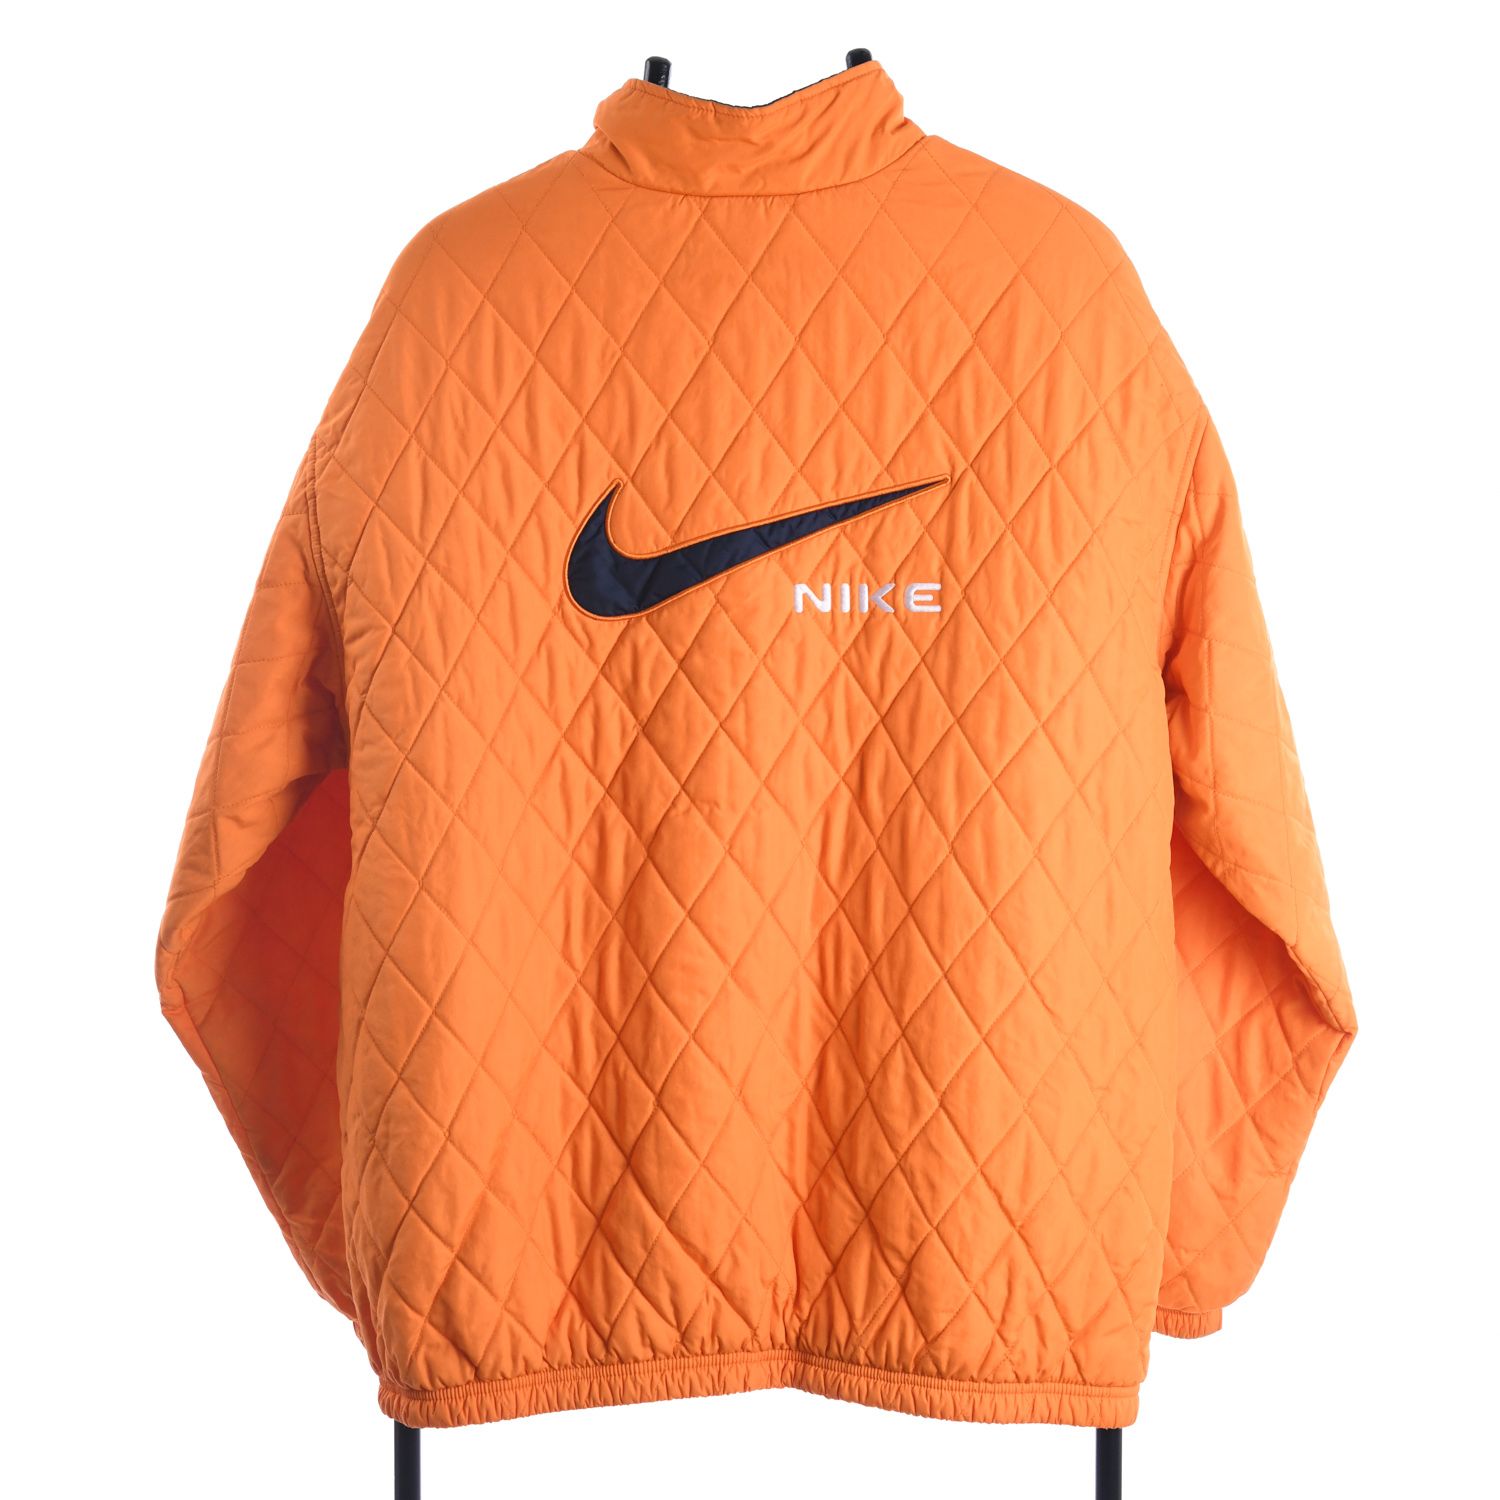 Nike Early 2000s Quilted Jacket